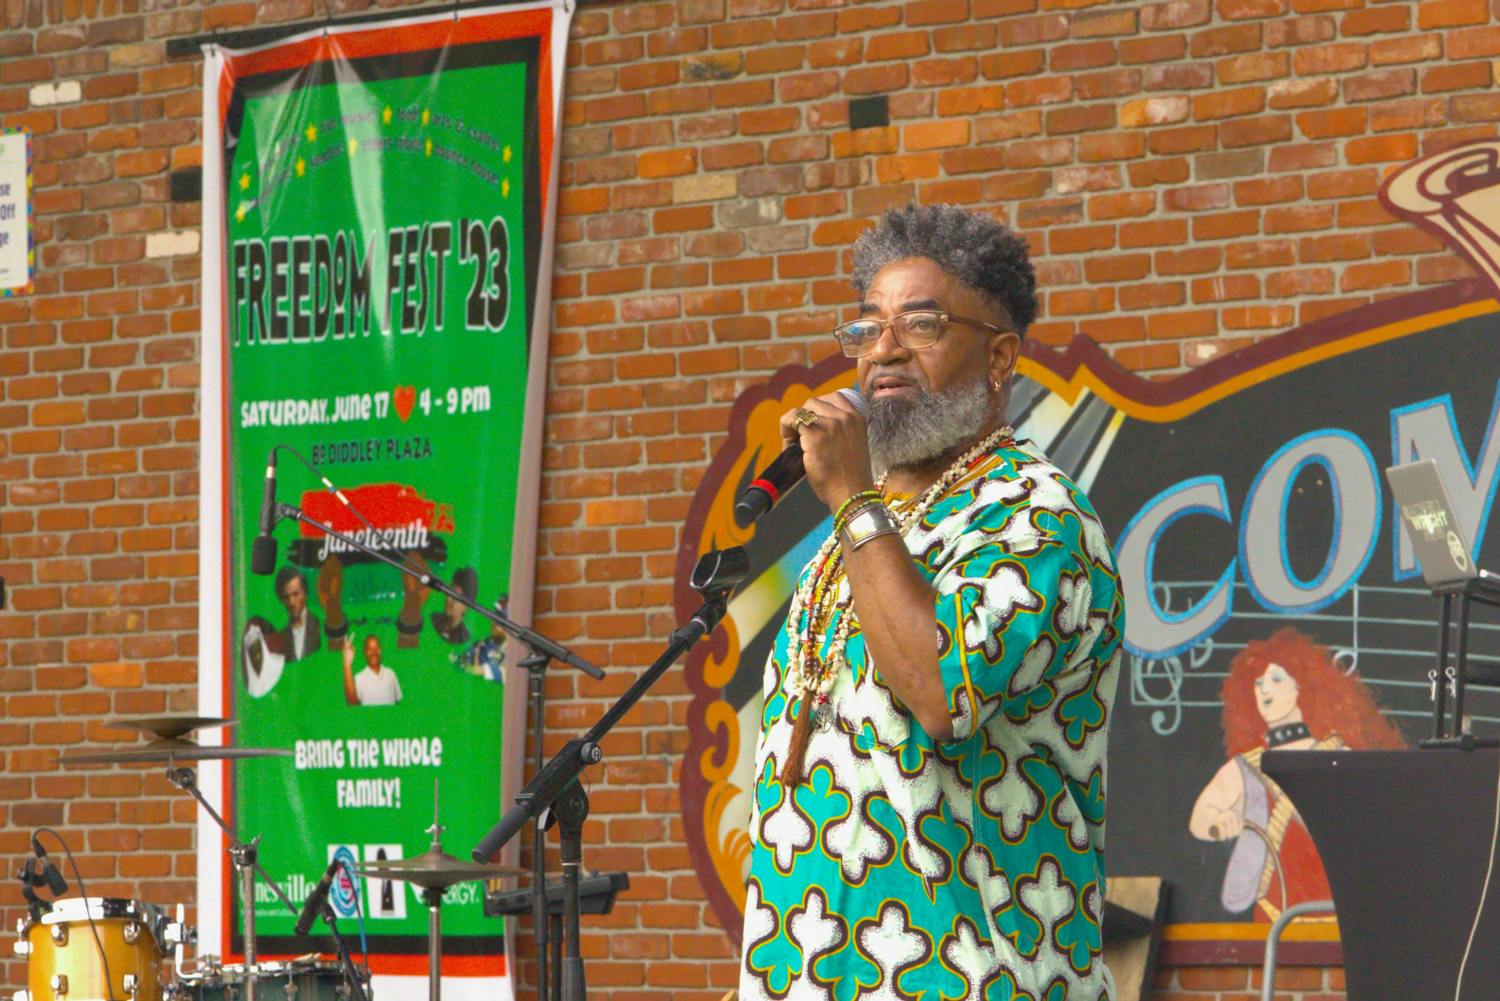 Turbado Marabou, a Yoruba Priest, gives a speech about ancestry at the Bo Diddley Plaza on Saturday, June 17, 2023. Marabou performed a libation, a spiritual ceremony where he poured liquid into a bowl.  